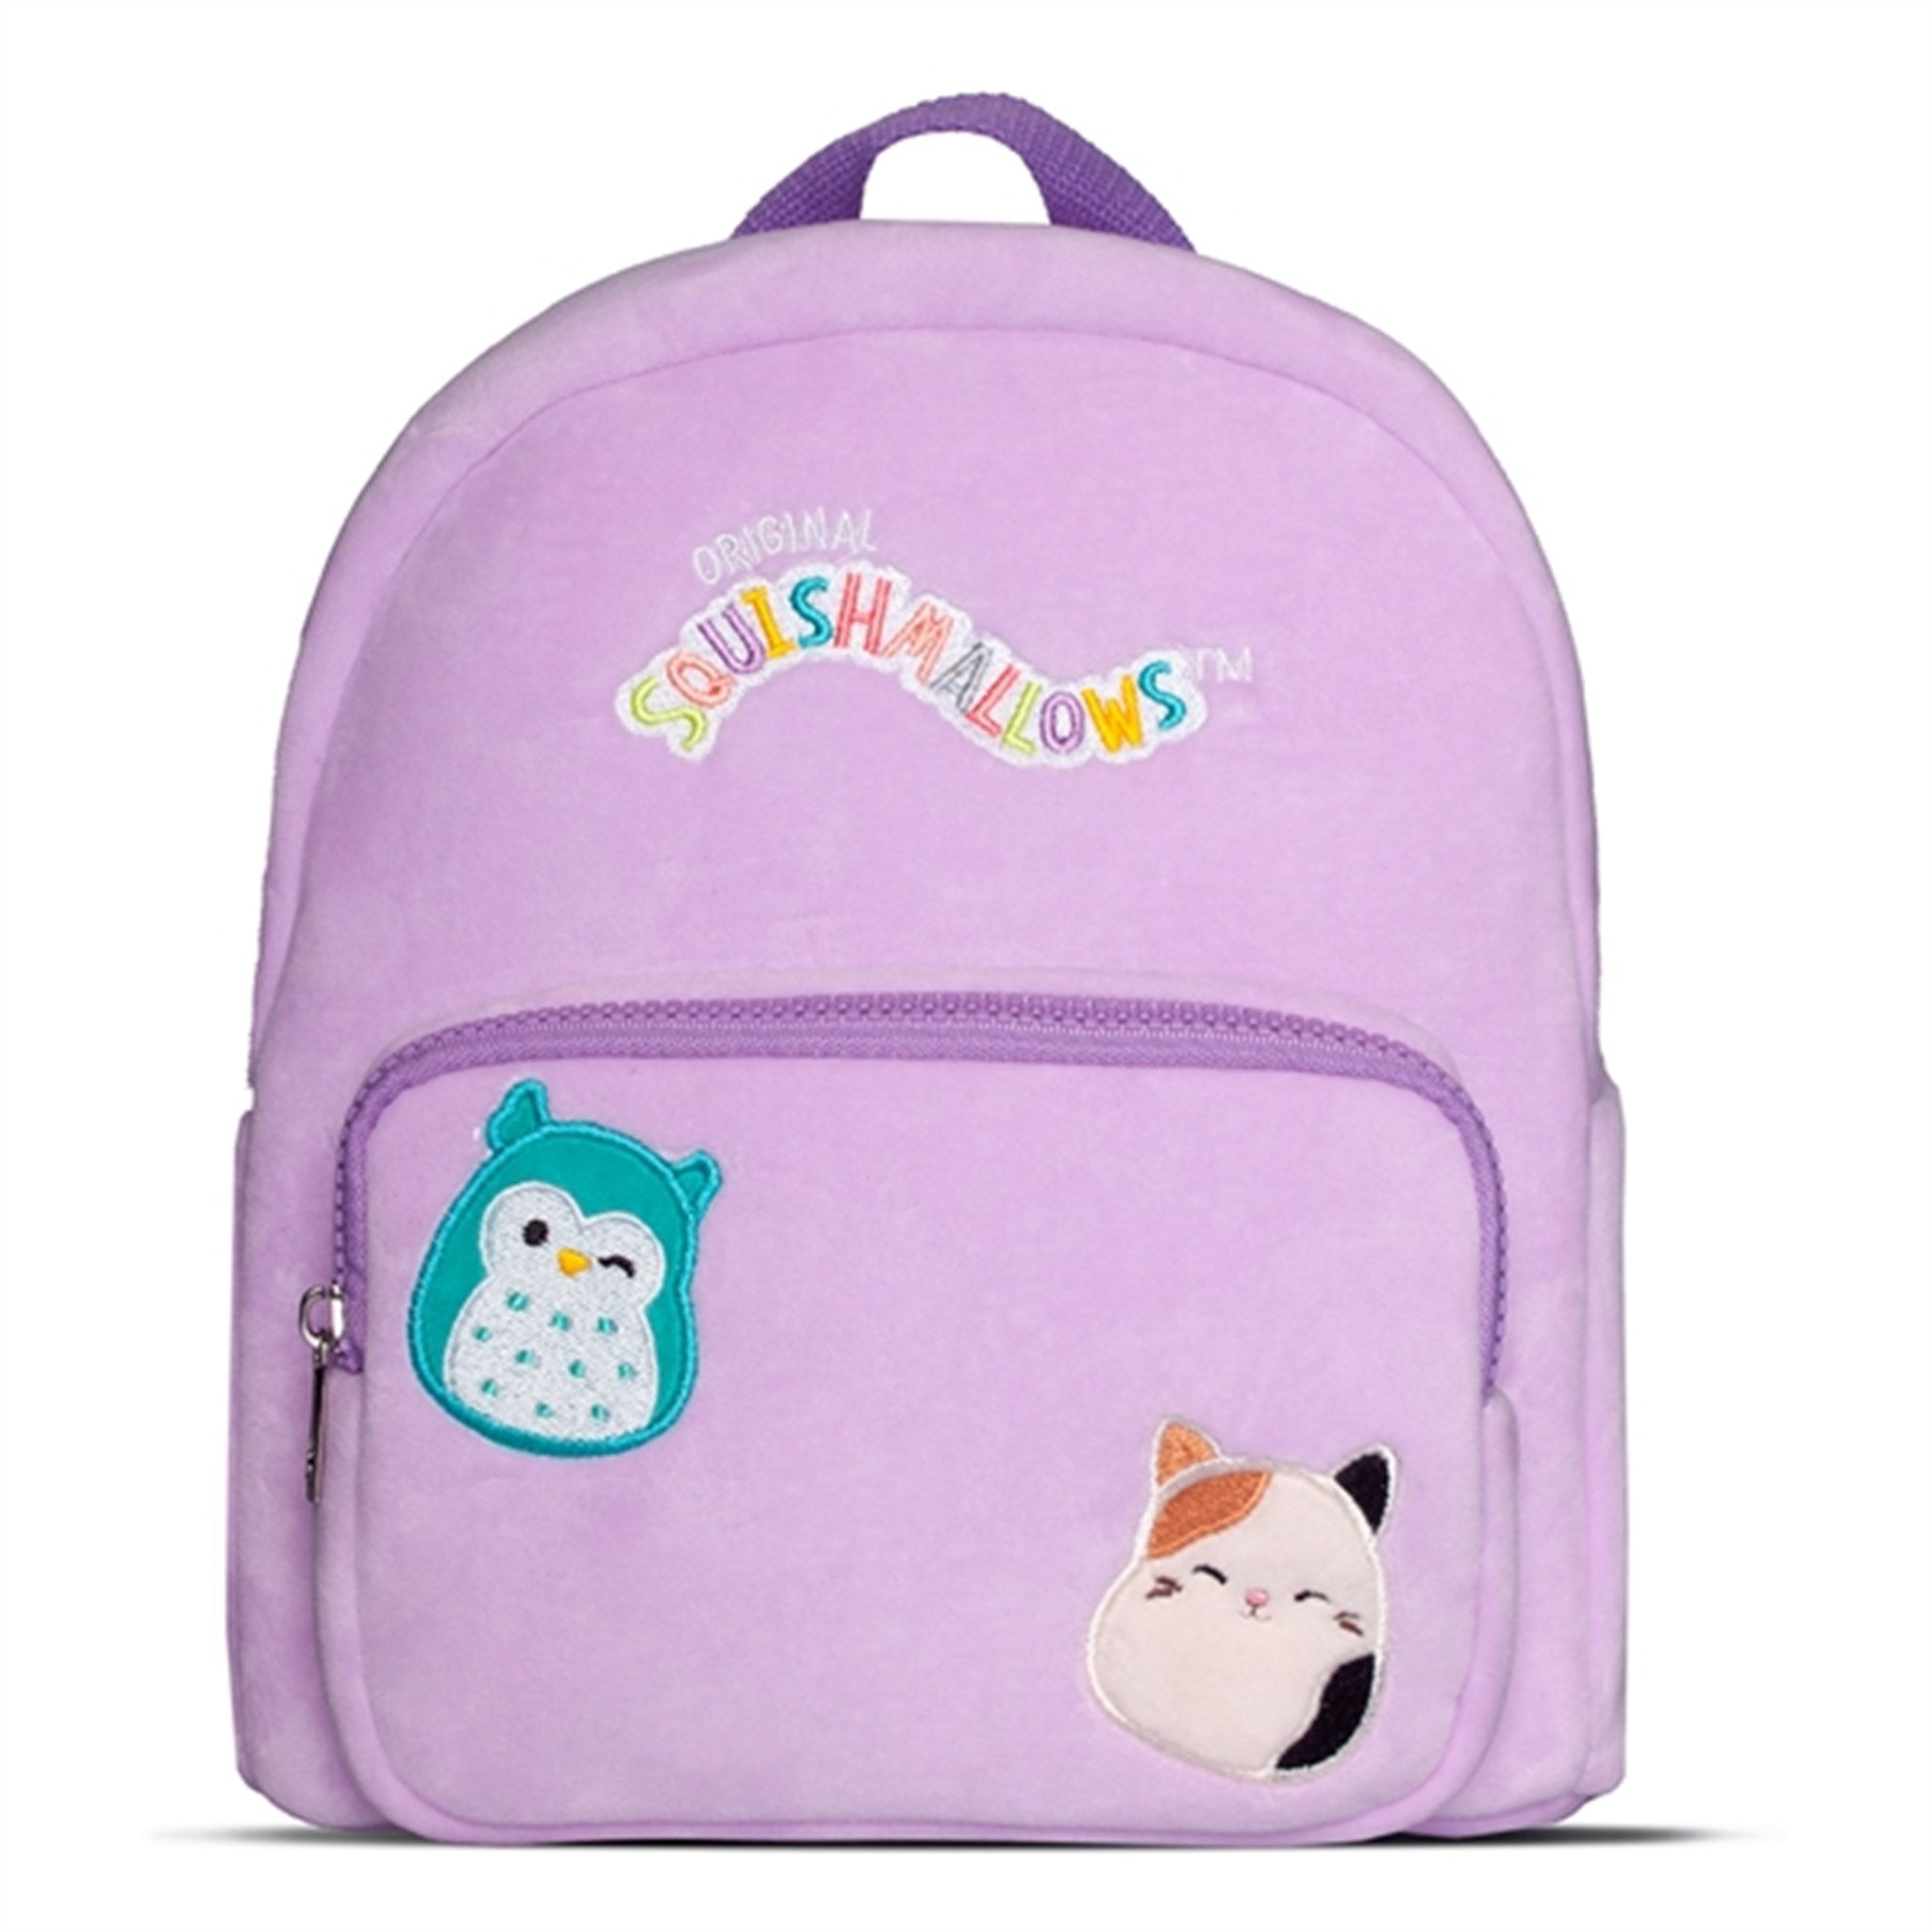 Squishmallows Backpack Purple